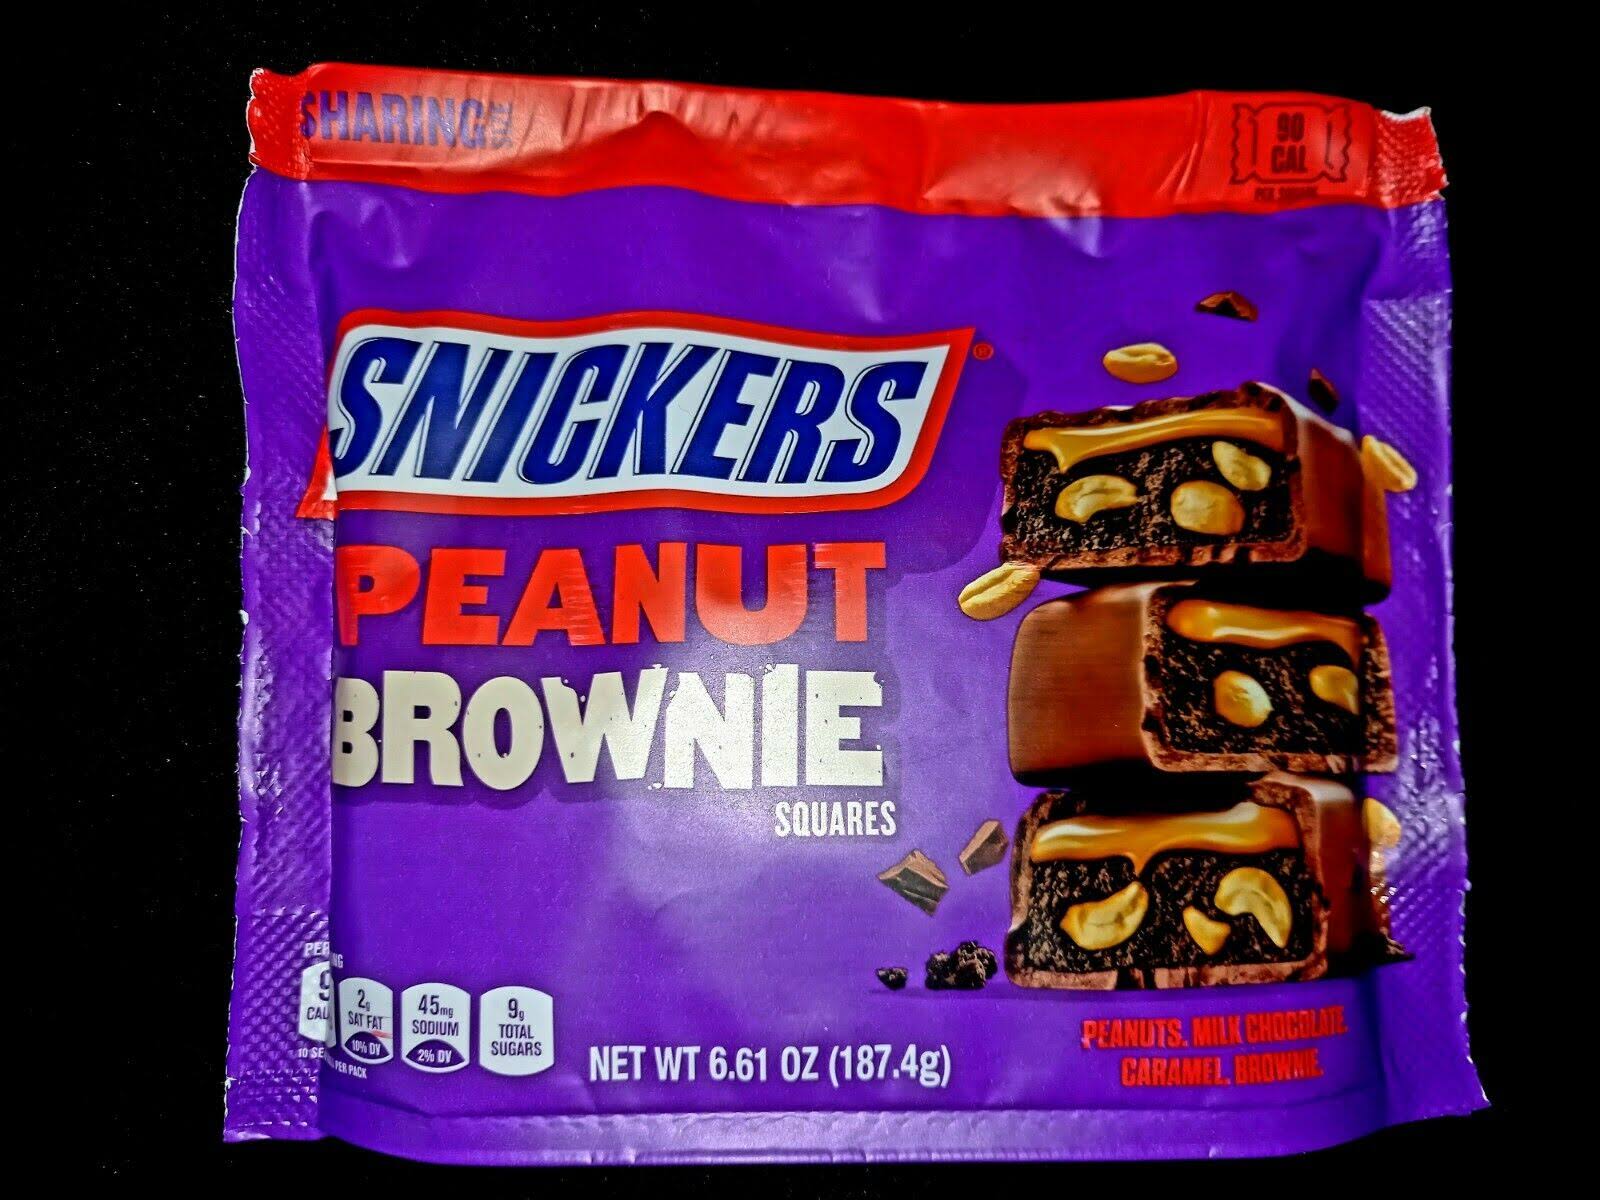 187.4g Snickers Peanut Brownie Squares Chocolate American Halloween Candy Sweets